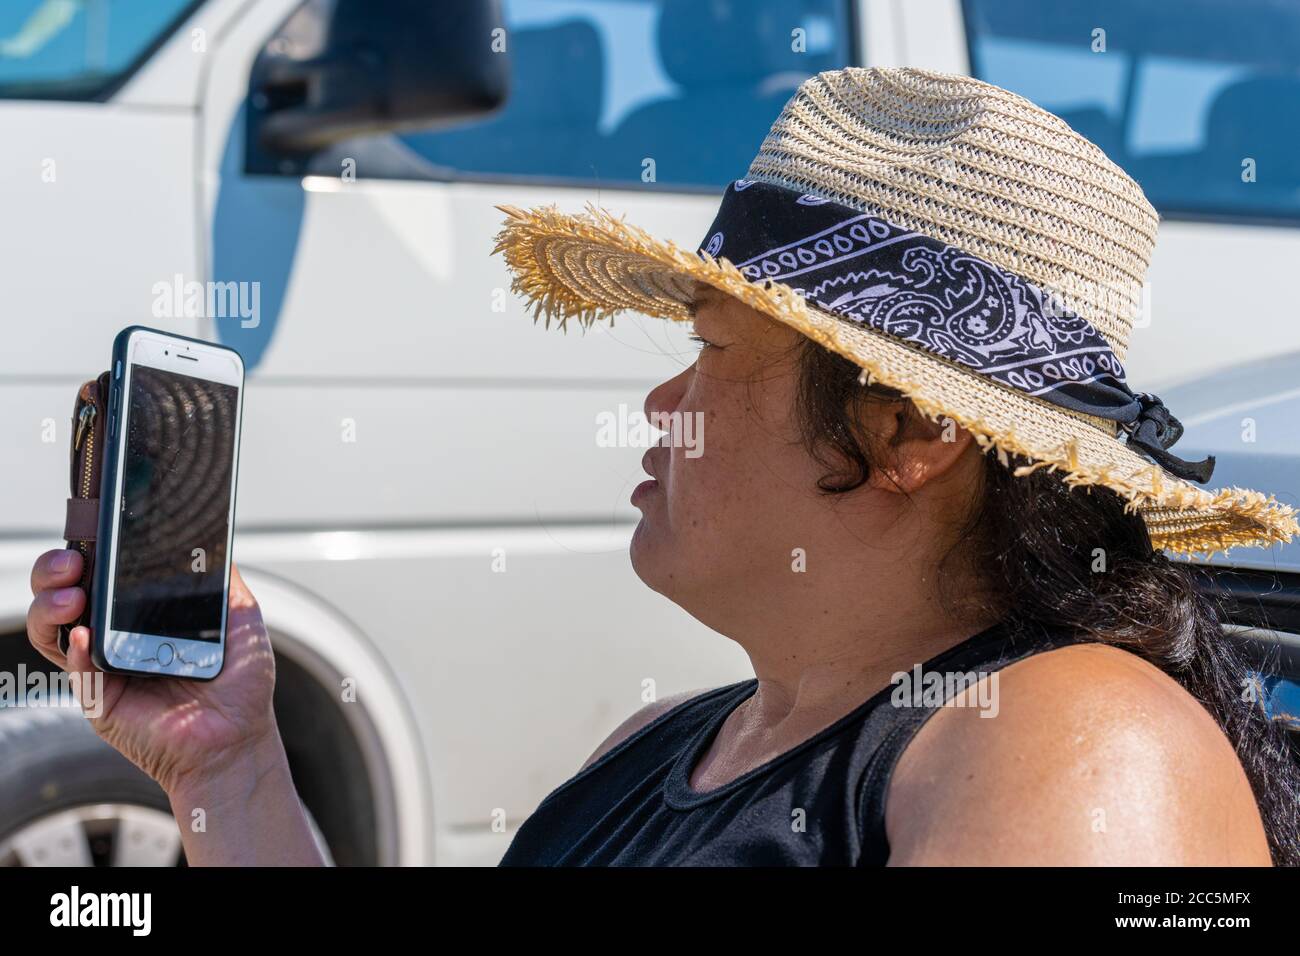 Closeup picture of a middle-aged Asian woman with a straw hat speaking in a smartphone a hot summer day. Bright blue sky in the background Stock Photo